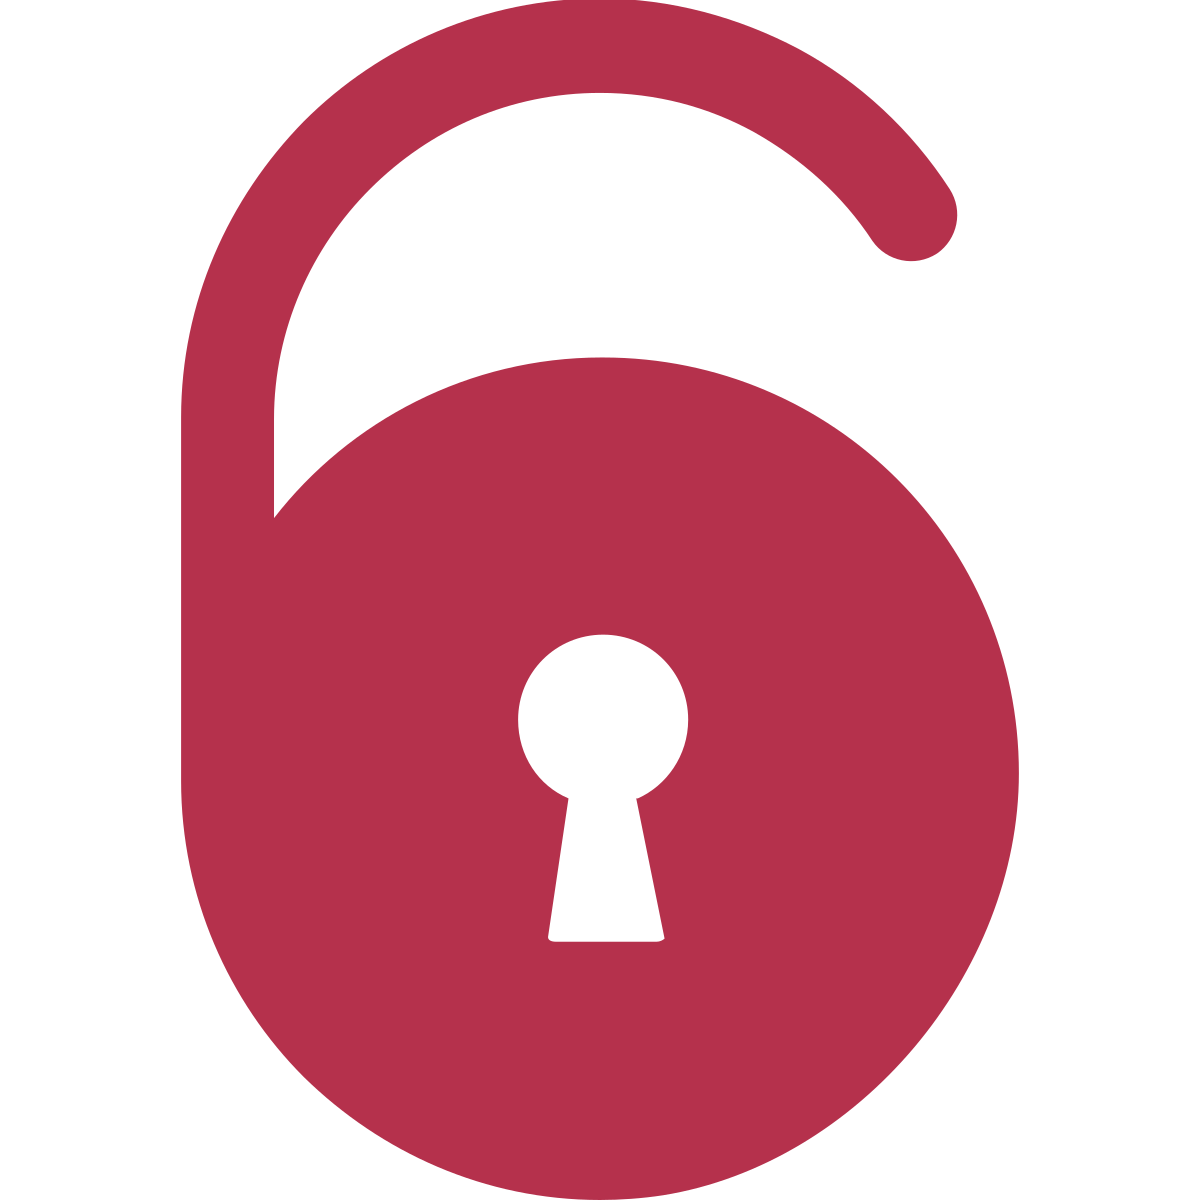 Free and Open Icon - an open circular lock composed of a circle, keyhole and a open latch